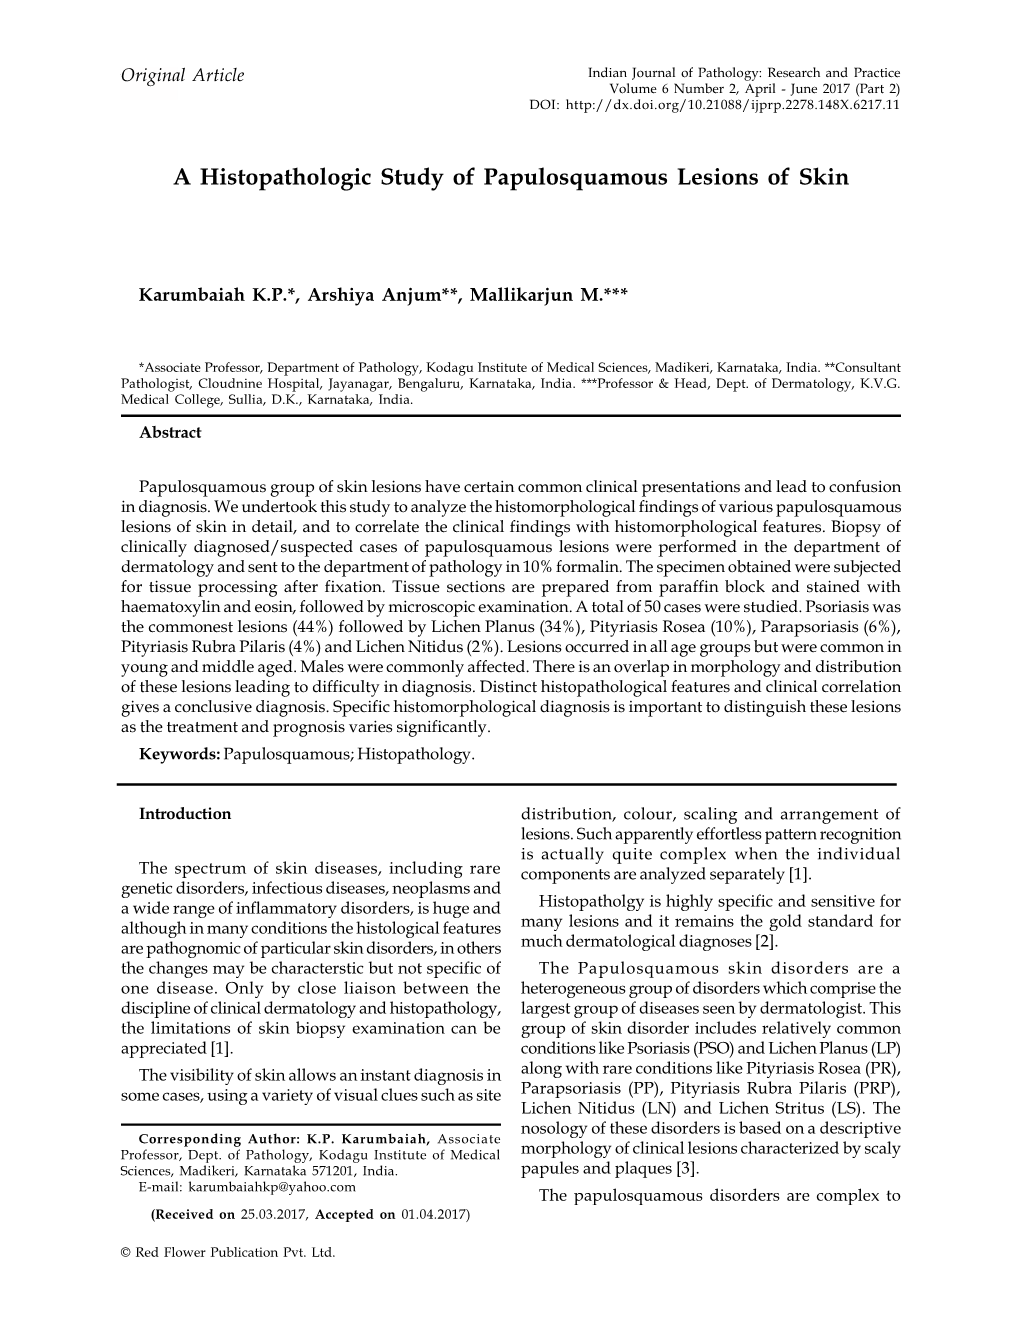 A Histopathologic Study of Papulosquamous Lesions of Skin